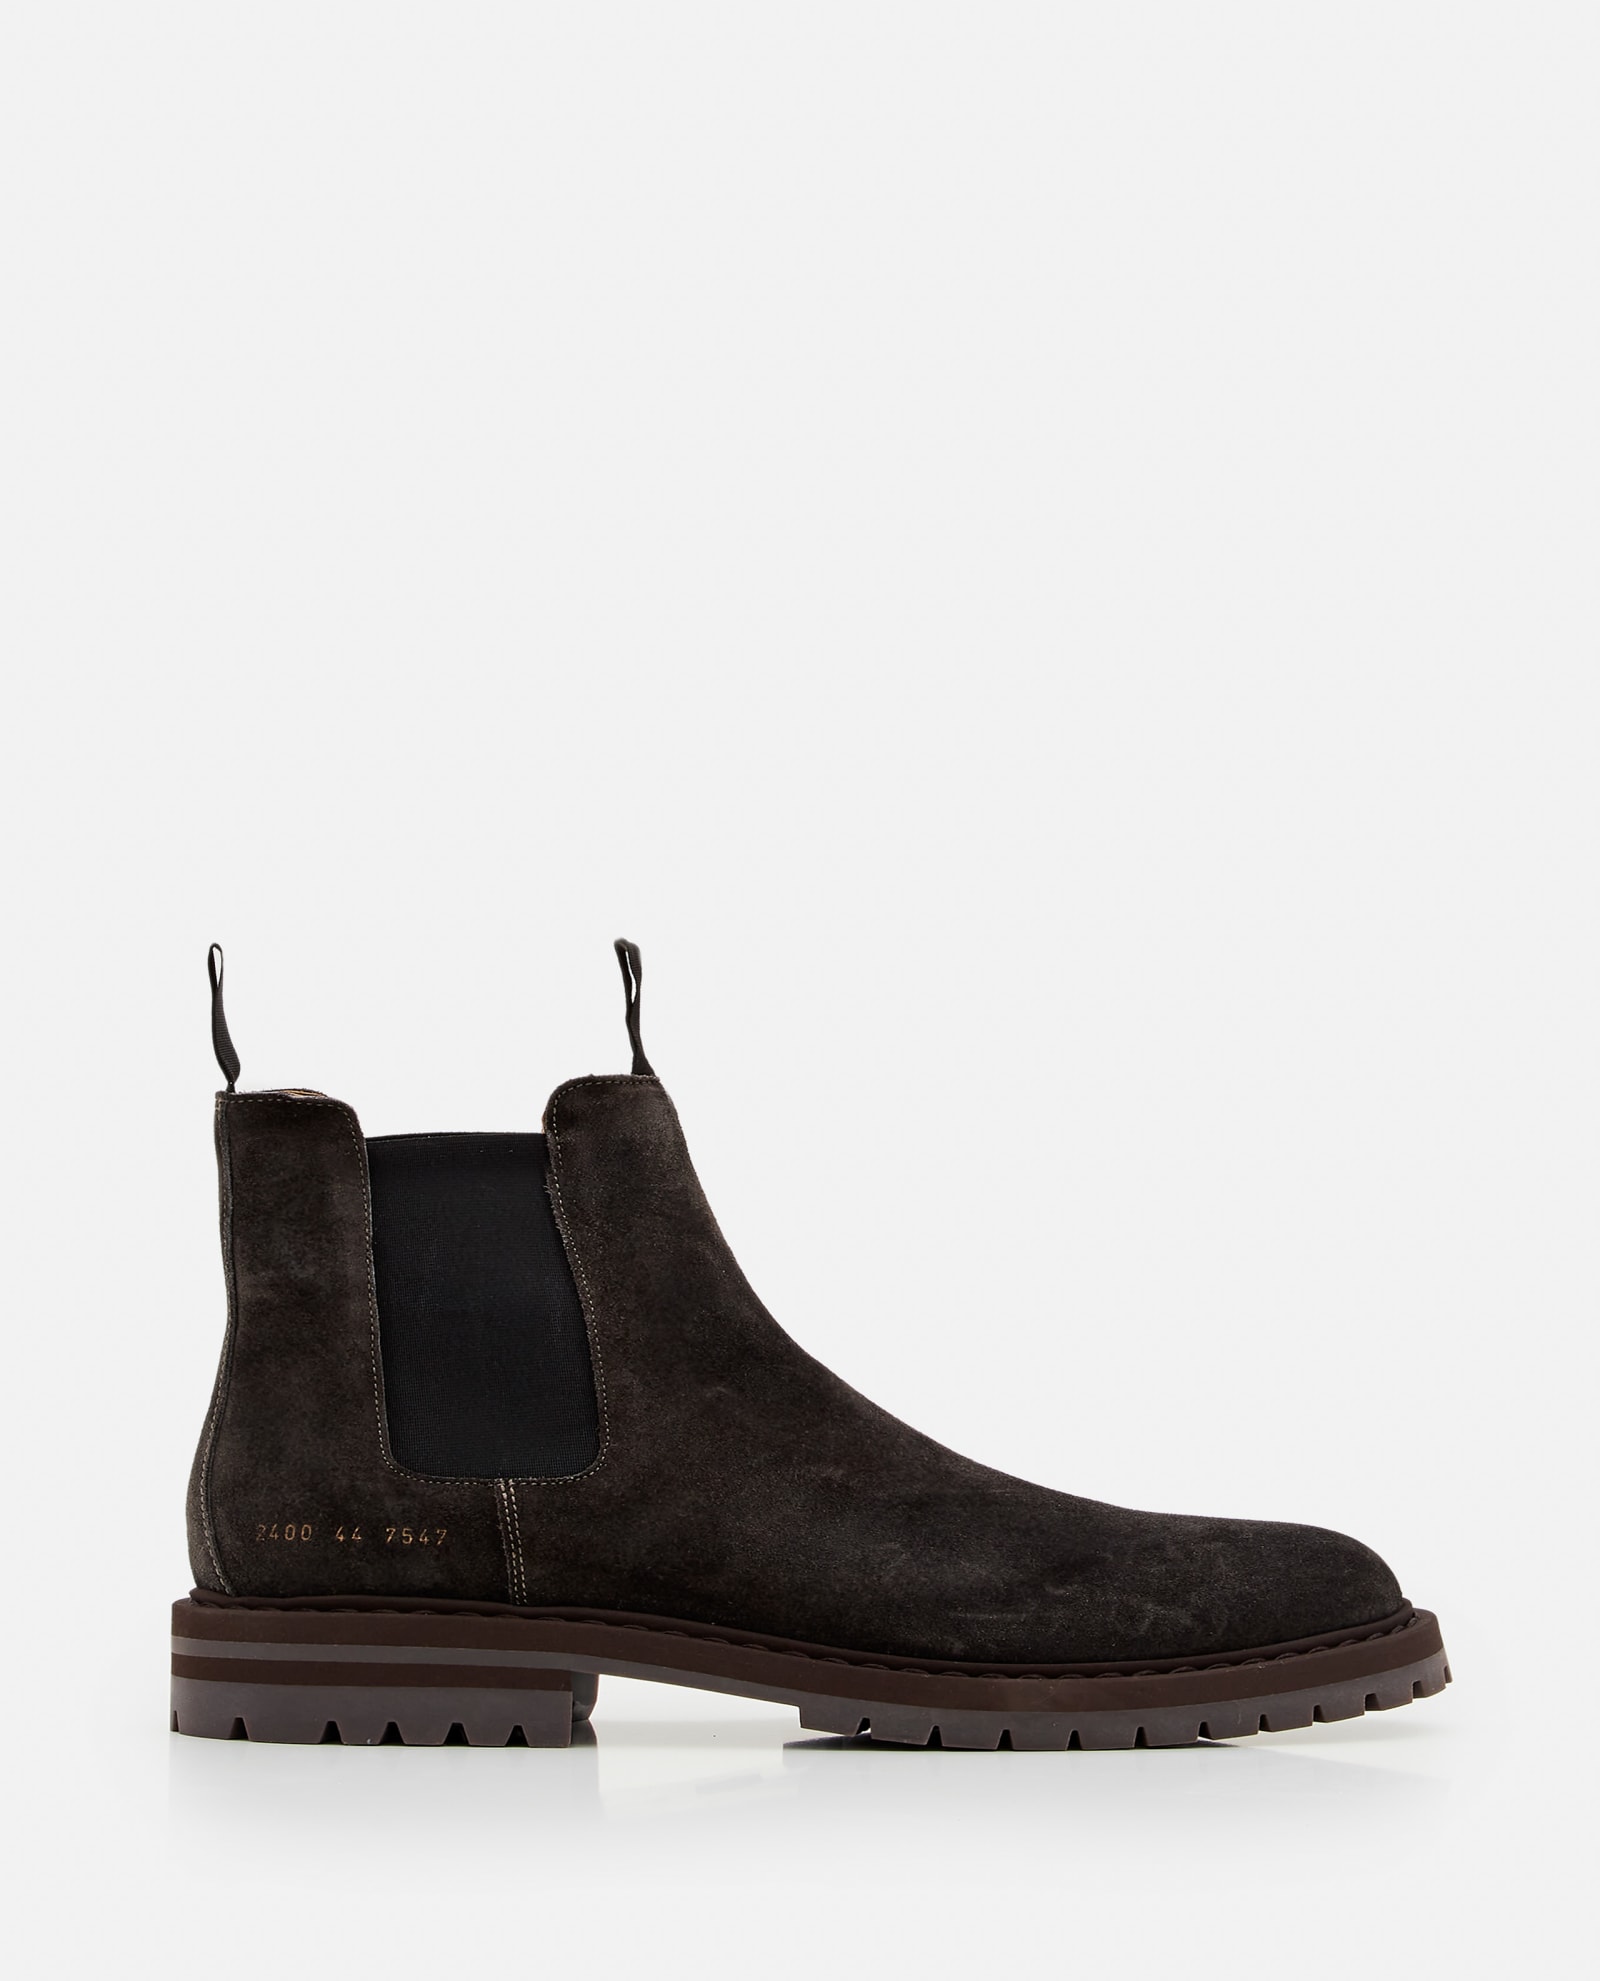 COMMON PROJECTS ANKLE BOOTS IN BLACK SUEDE